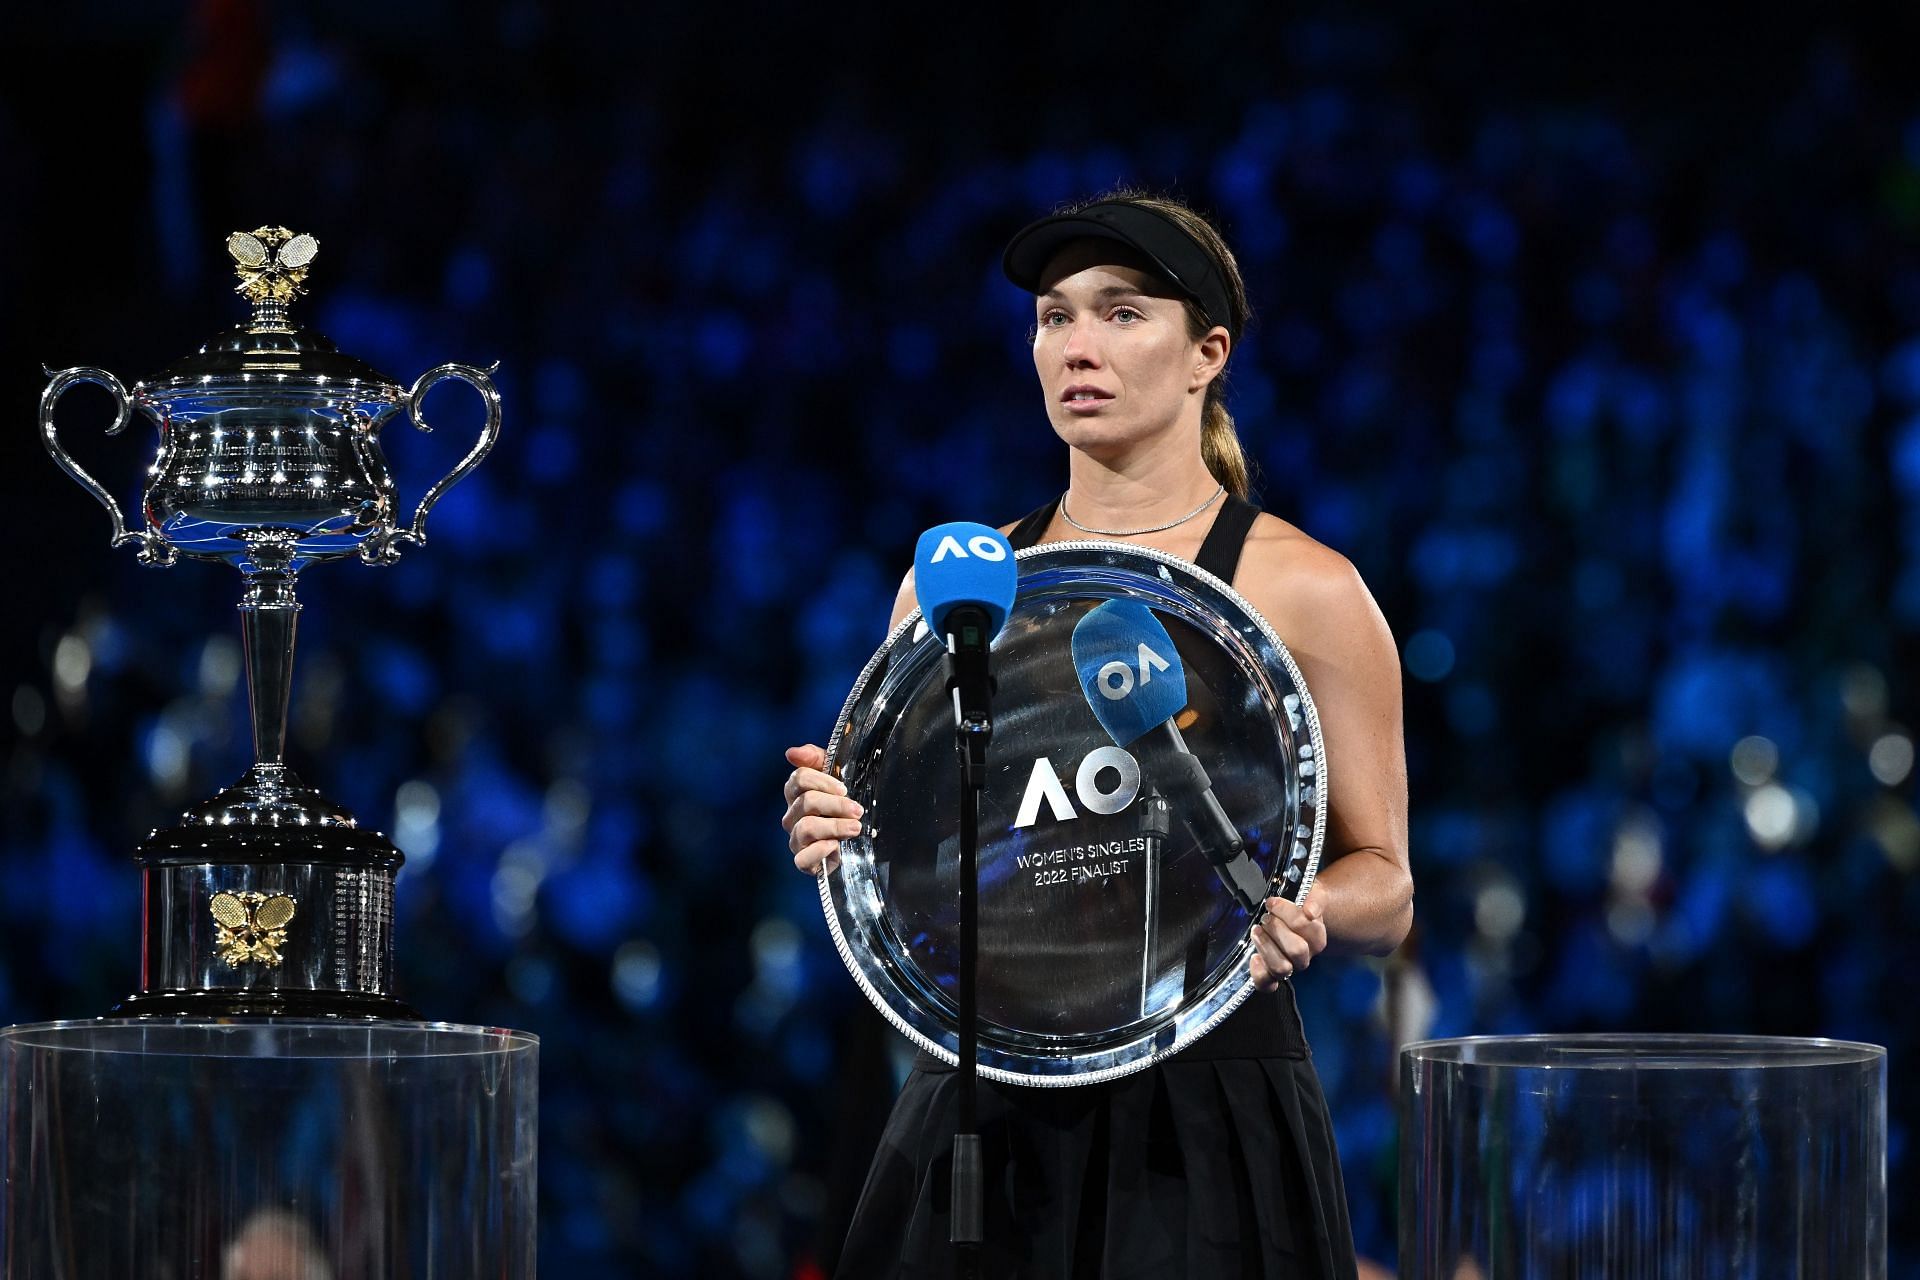 Danielle Collins finished as runner-up at the 2022 Australian Open